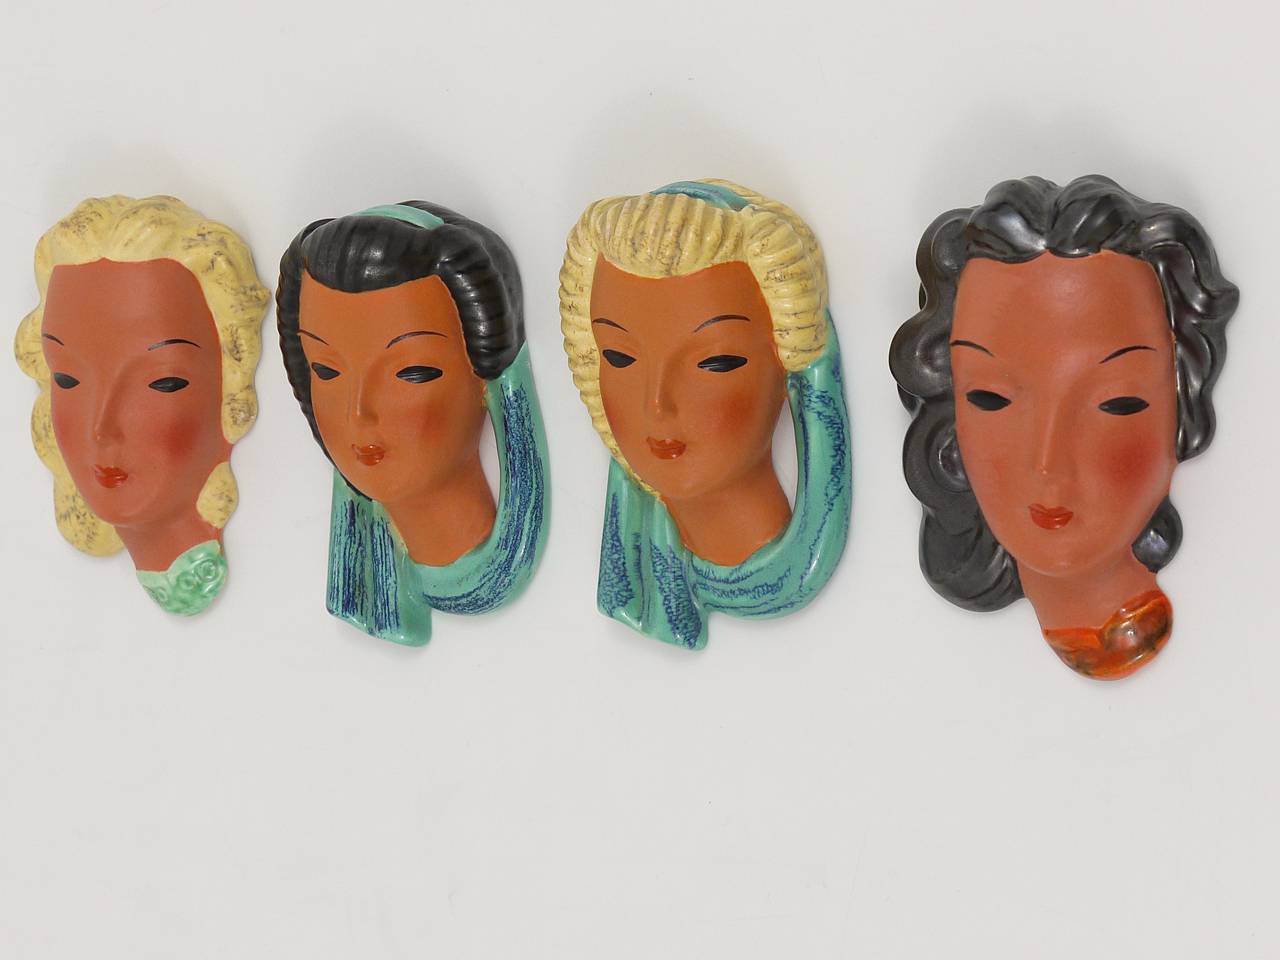 A lovely set of four Austrian terracotta miniature wall masks, designed by Adolf Prischl, executed by Friedrich Goldscheider Vienna in the 1950s. All four masks are in excellent condition. Marked and numbered.